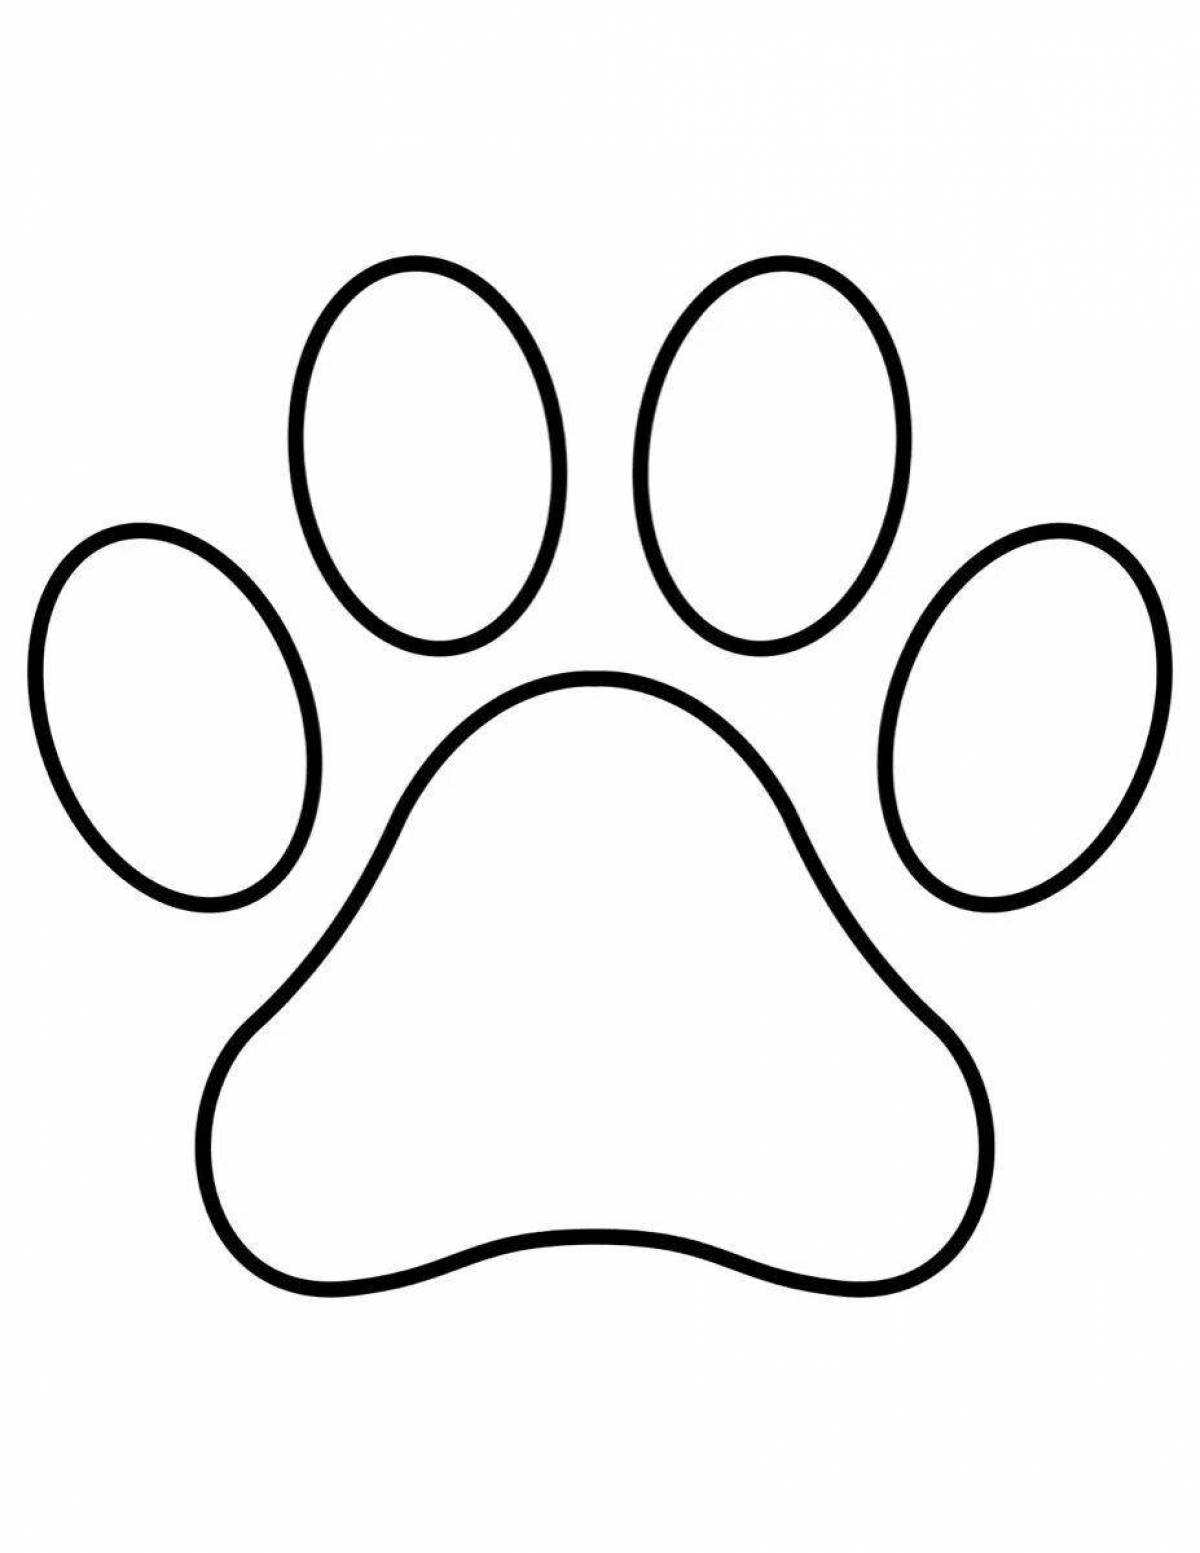 Fascinating cat paw coloring page